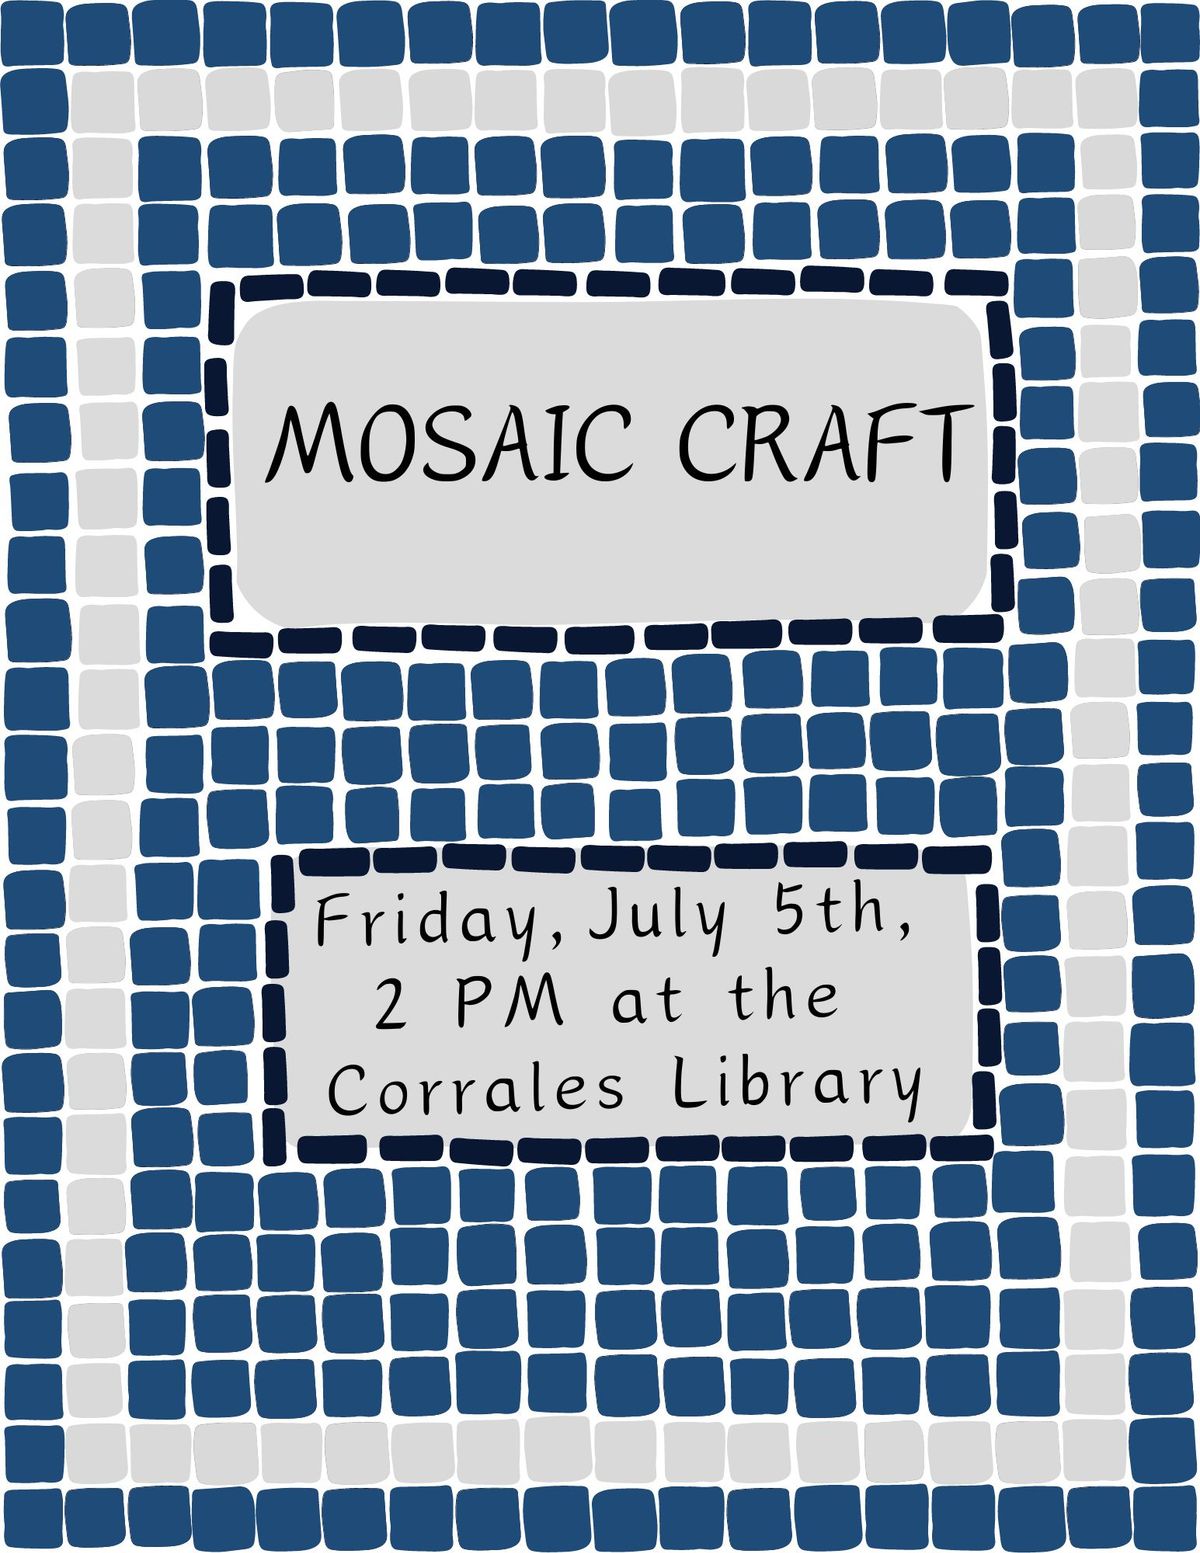 Mosaic Craft for Tweens and Teens!